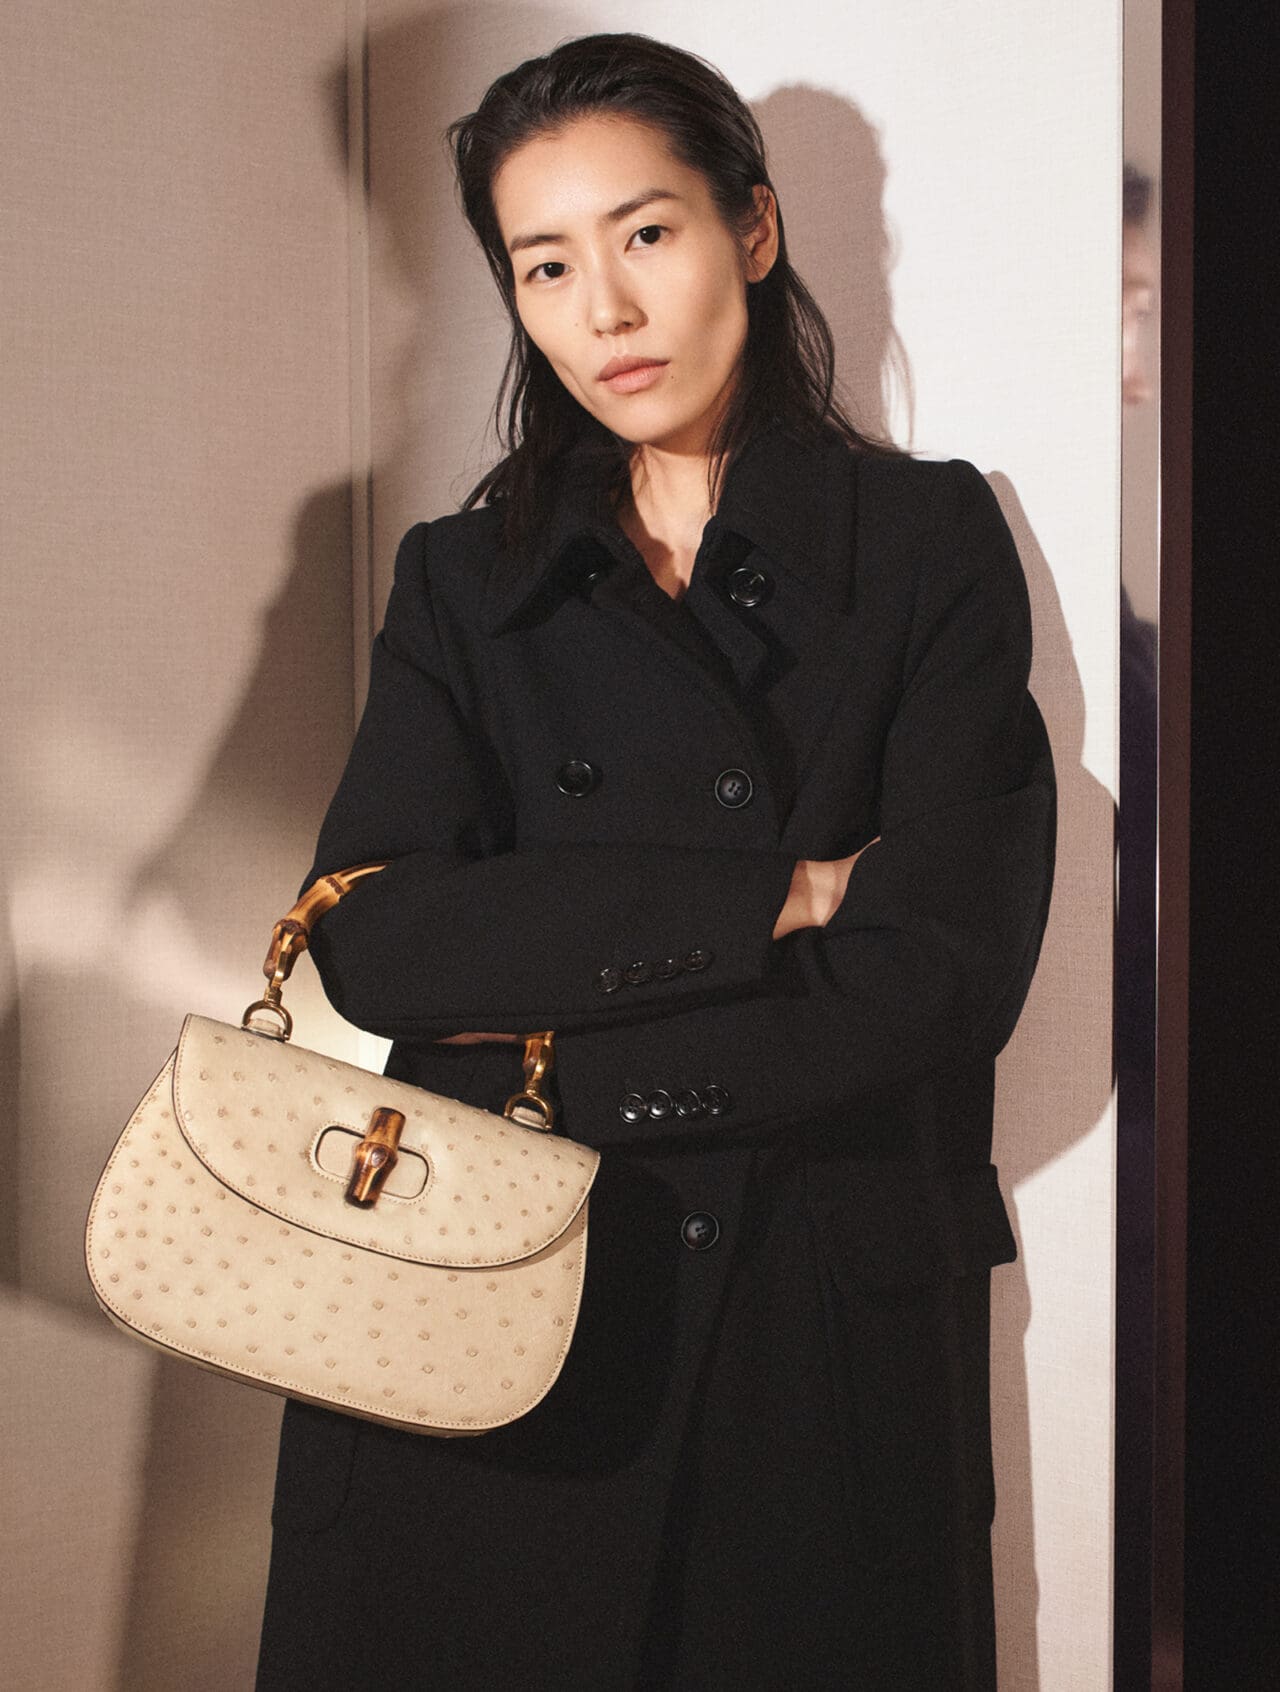 Gucci Latest Bamboo 1947 Campaign Featuring Liu Wen by David Sims